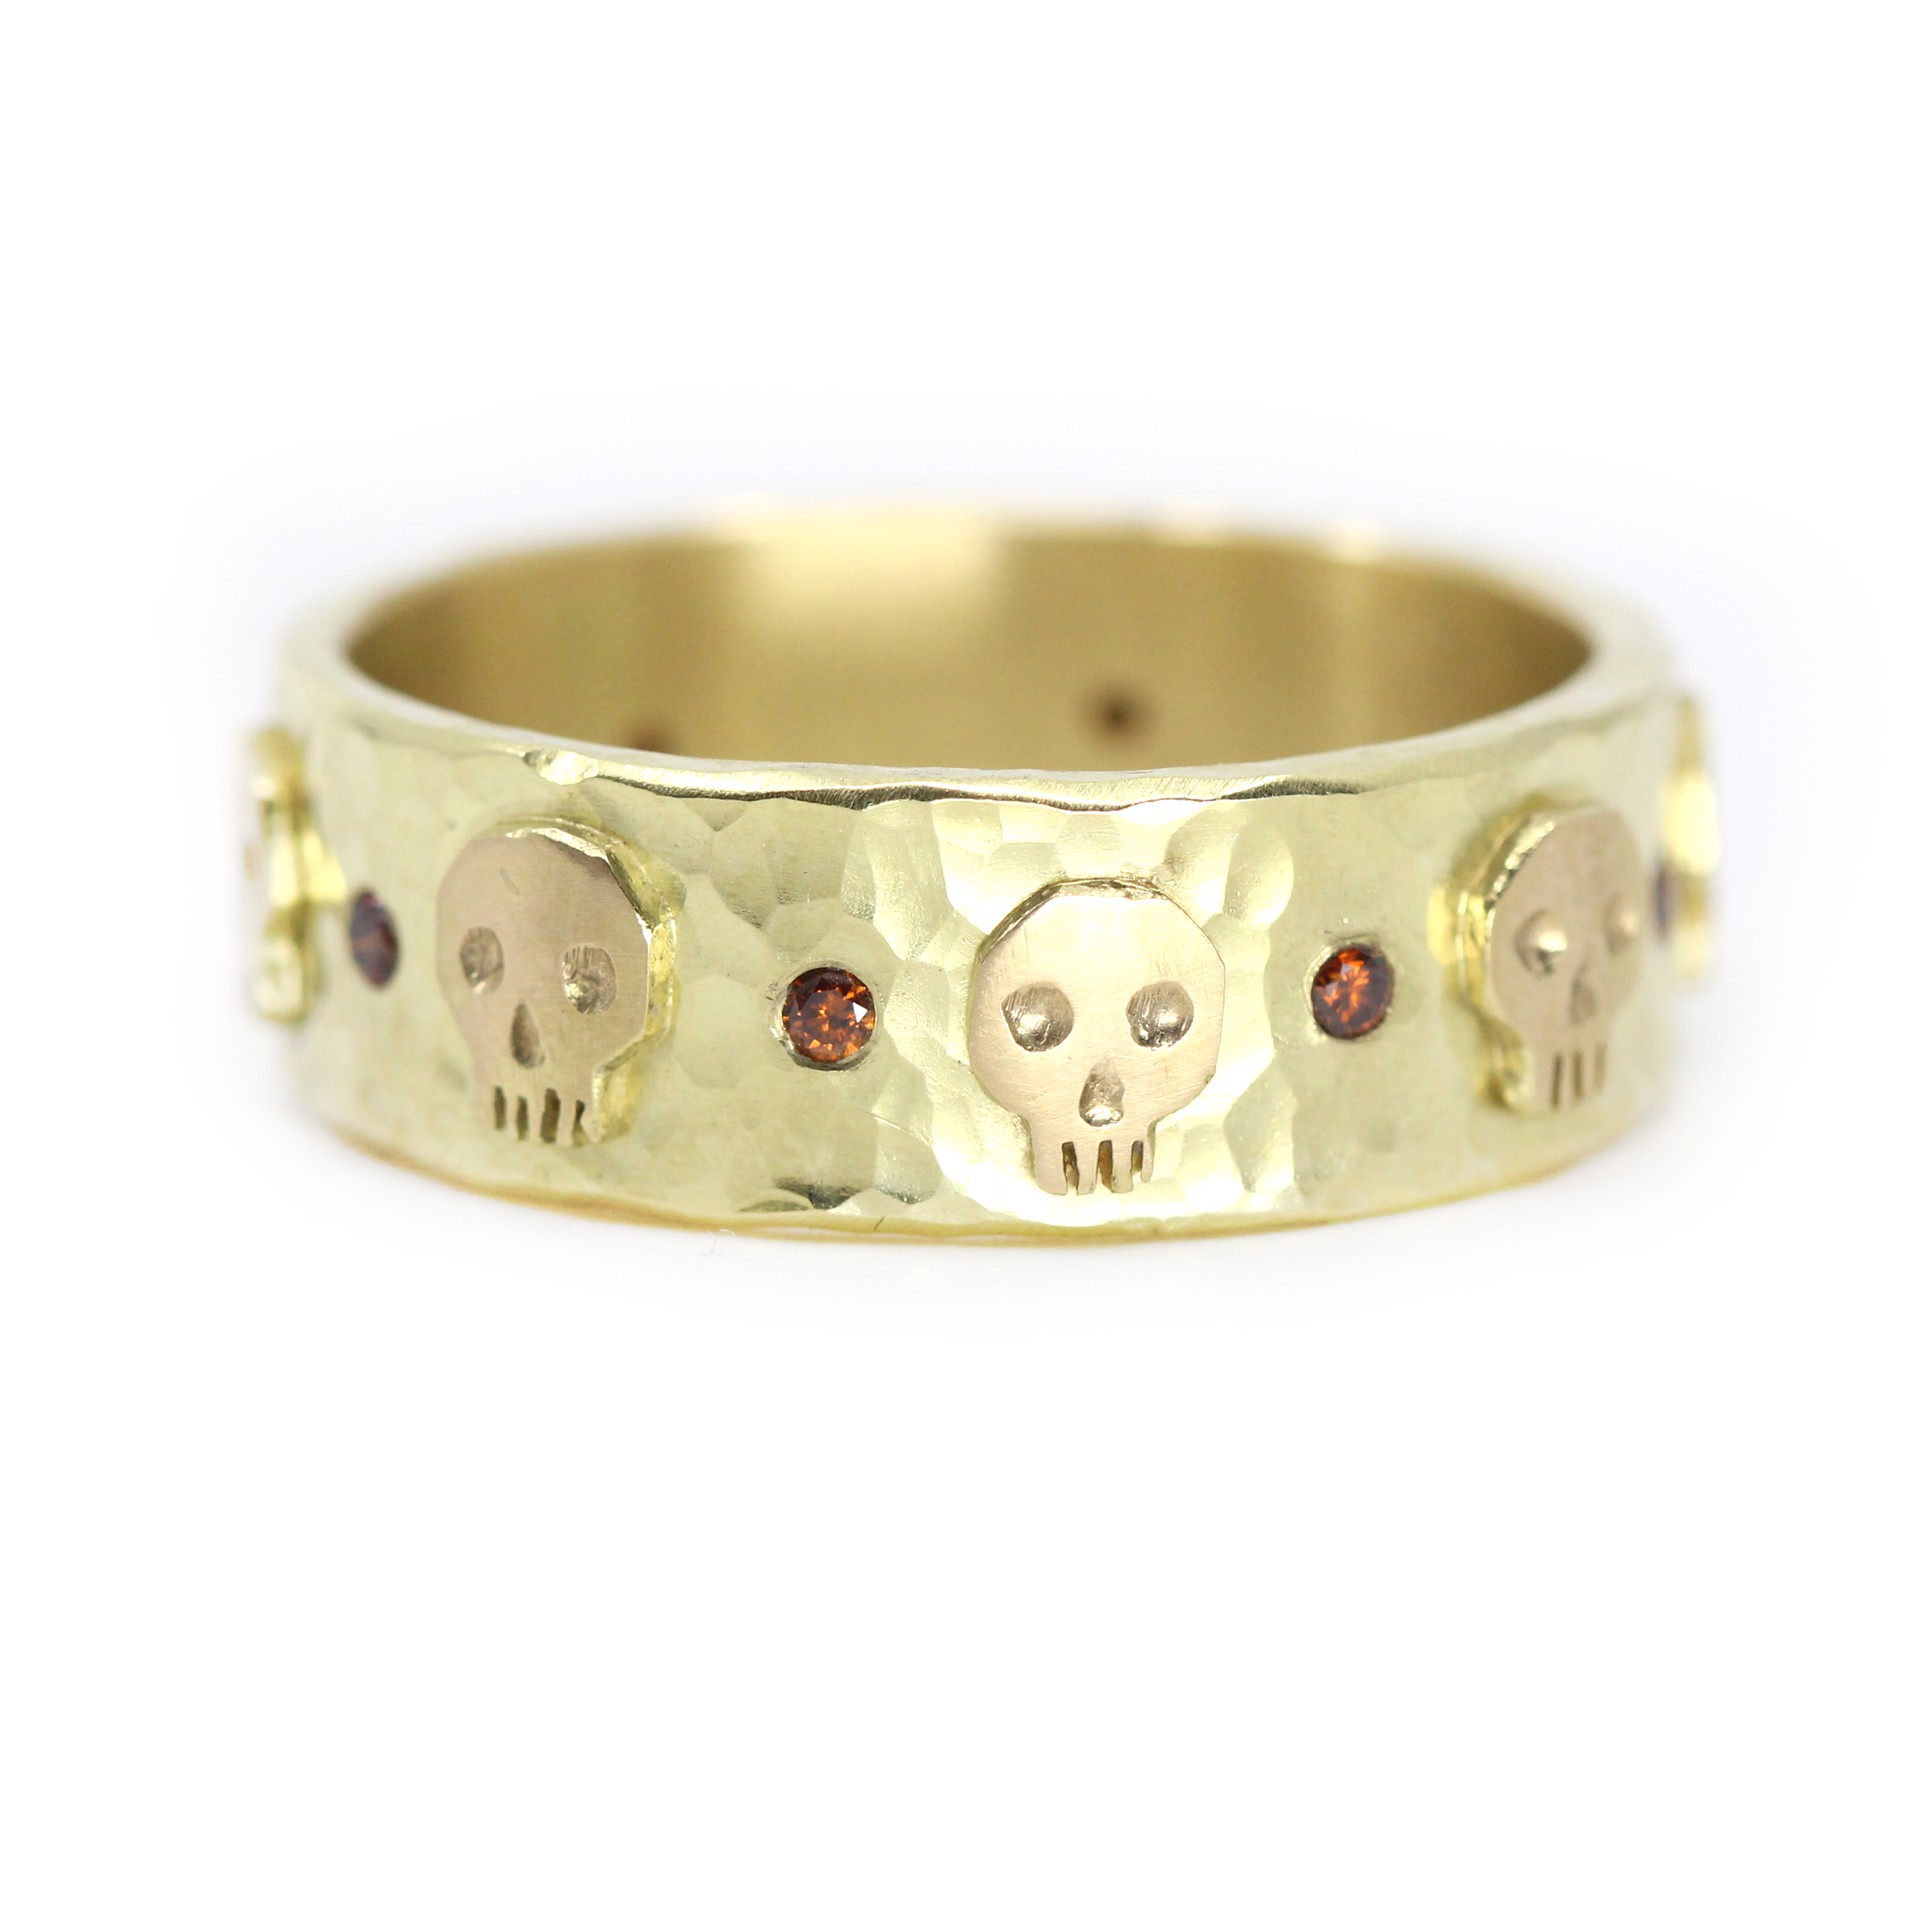 Multi-Skull and Gem Band (Size 12.25) by Susan Elnora